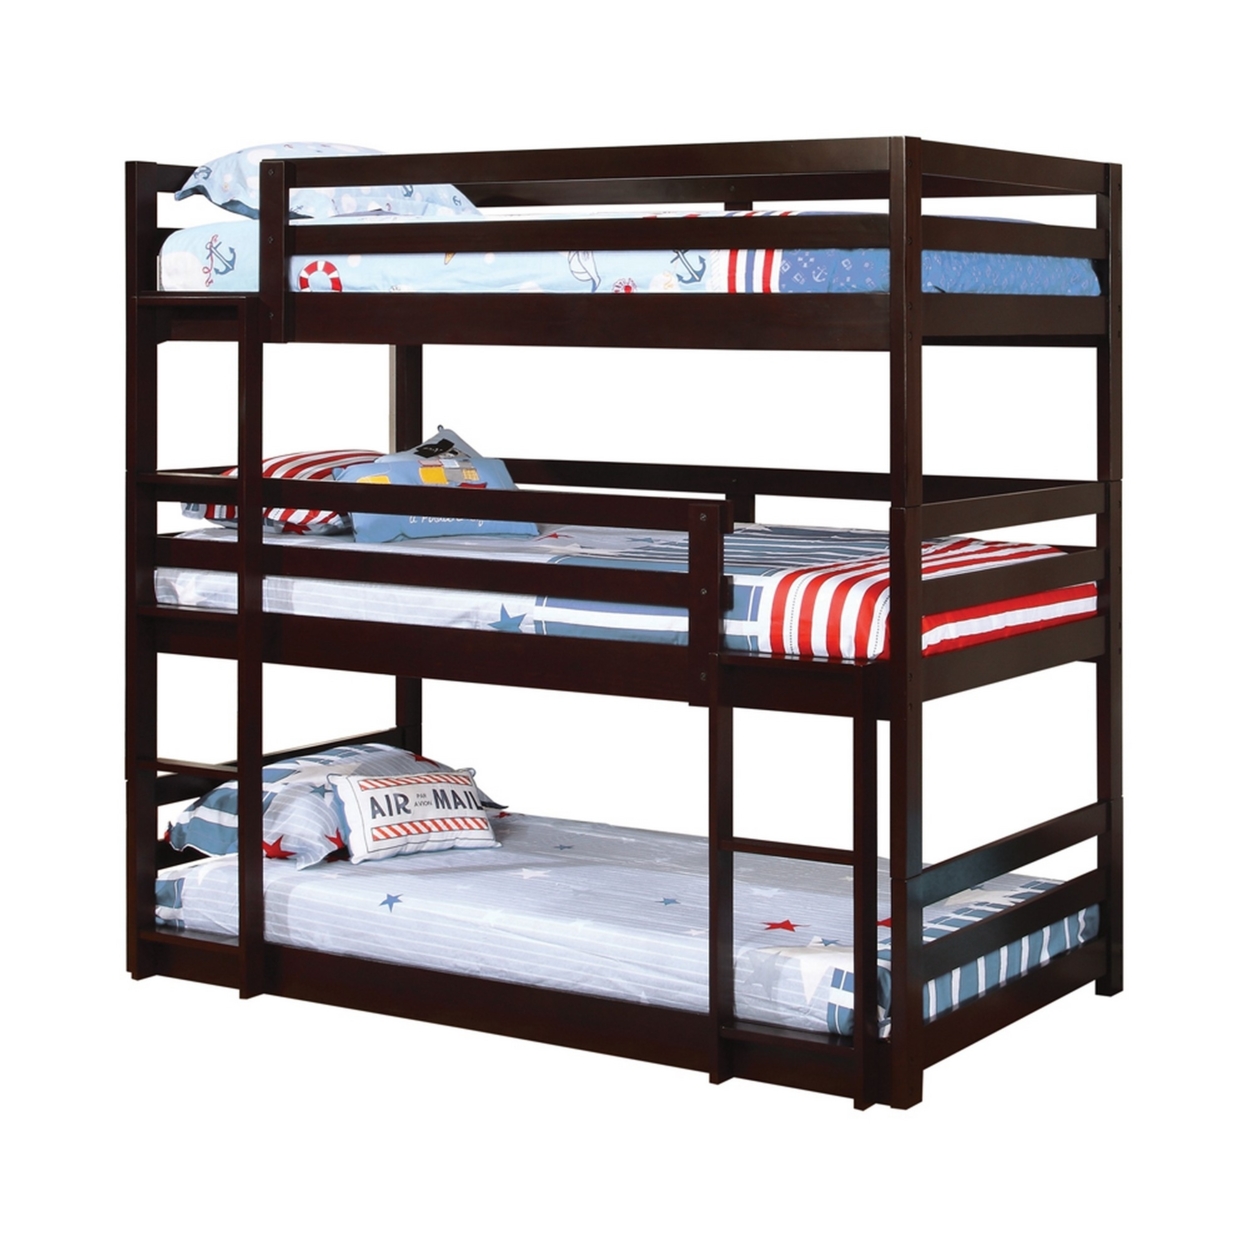 Transitional Style Wooden Triple Twin Bunk Bed With Guard Rails, Brown- Saltoro Sherpi